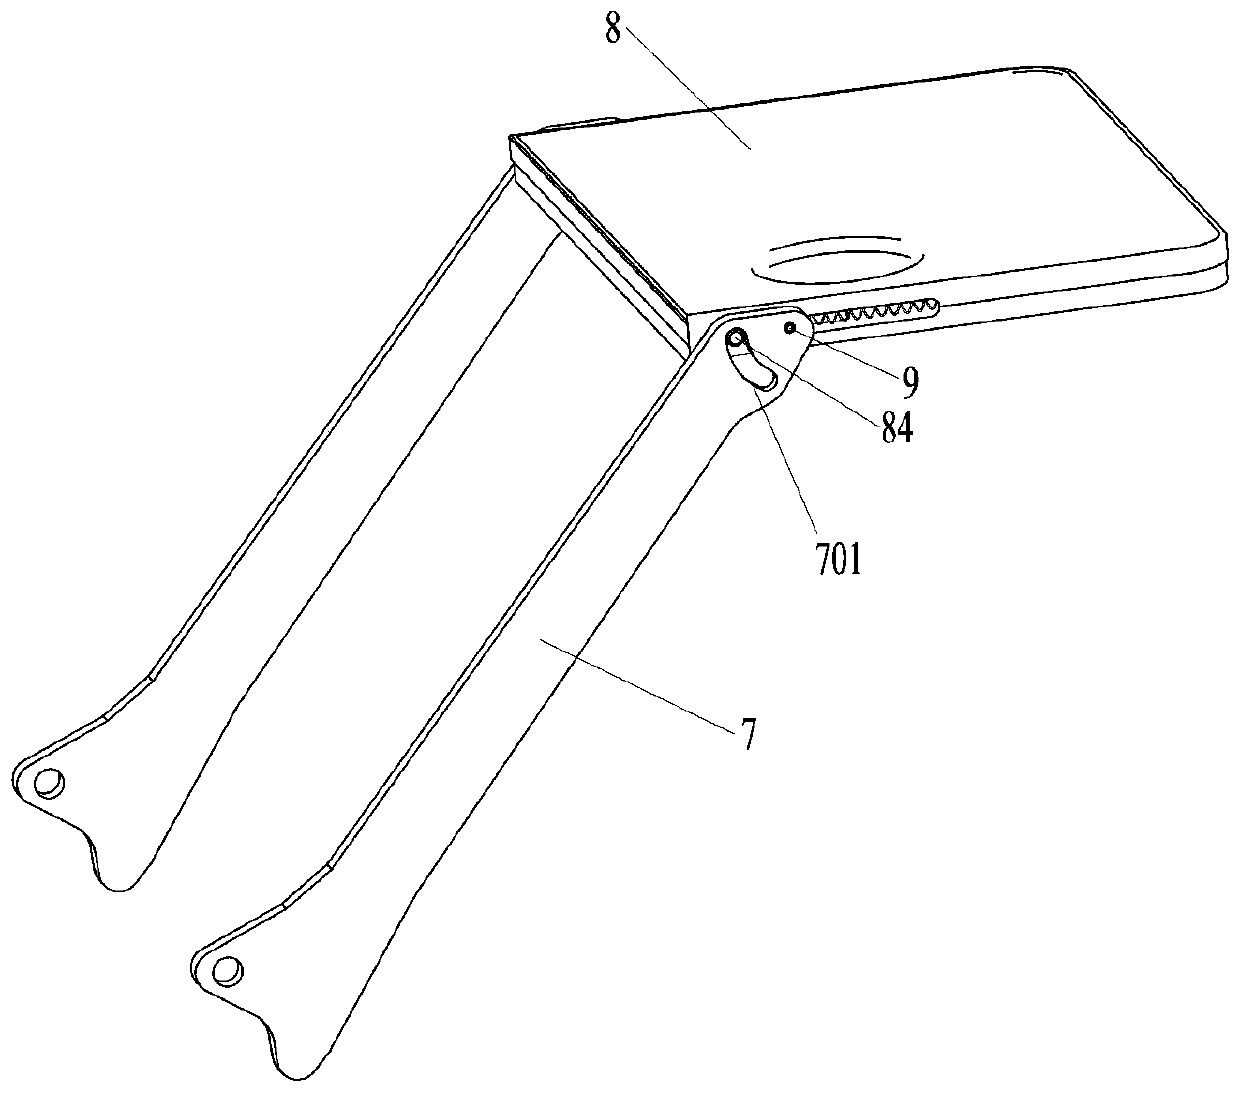 Table board structure used on back of train or airplane seat